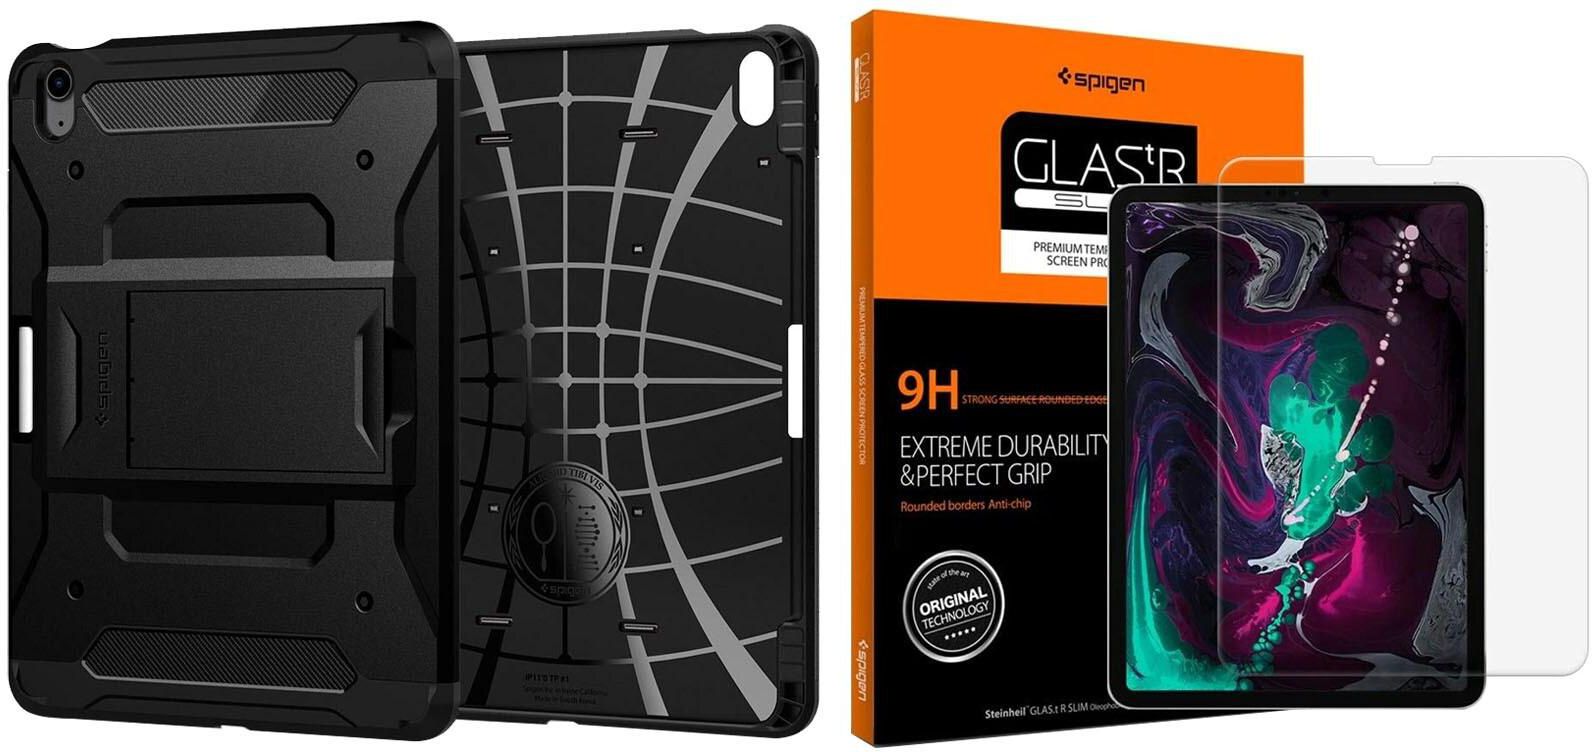 Spigen Tough Armor Pro Case With Kickstand And Glastr Slim Screen Protector For Apple iPad Air